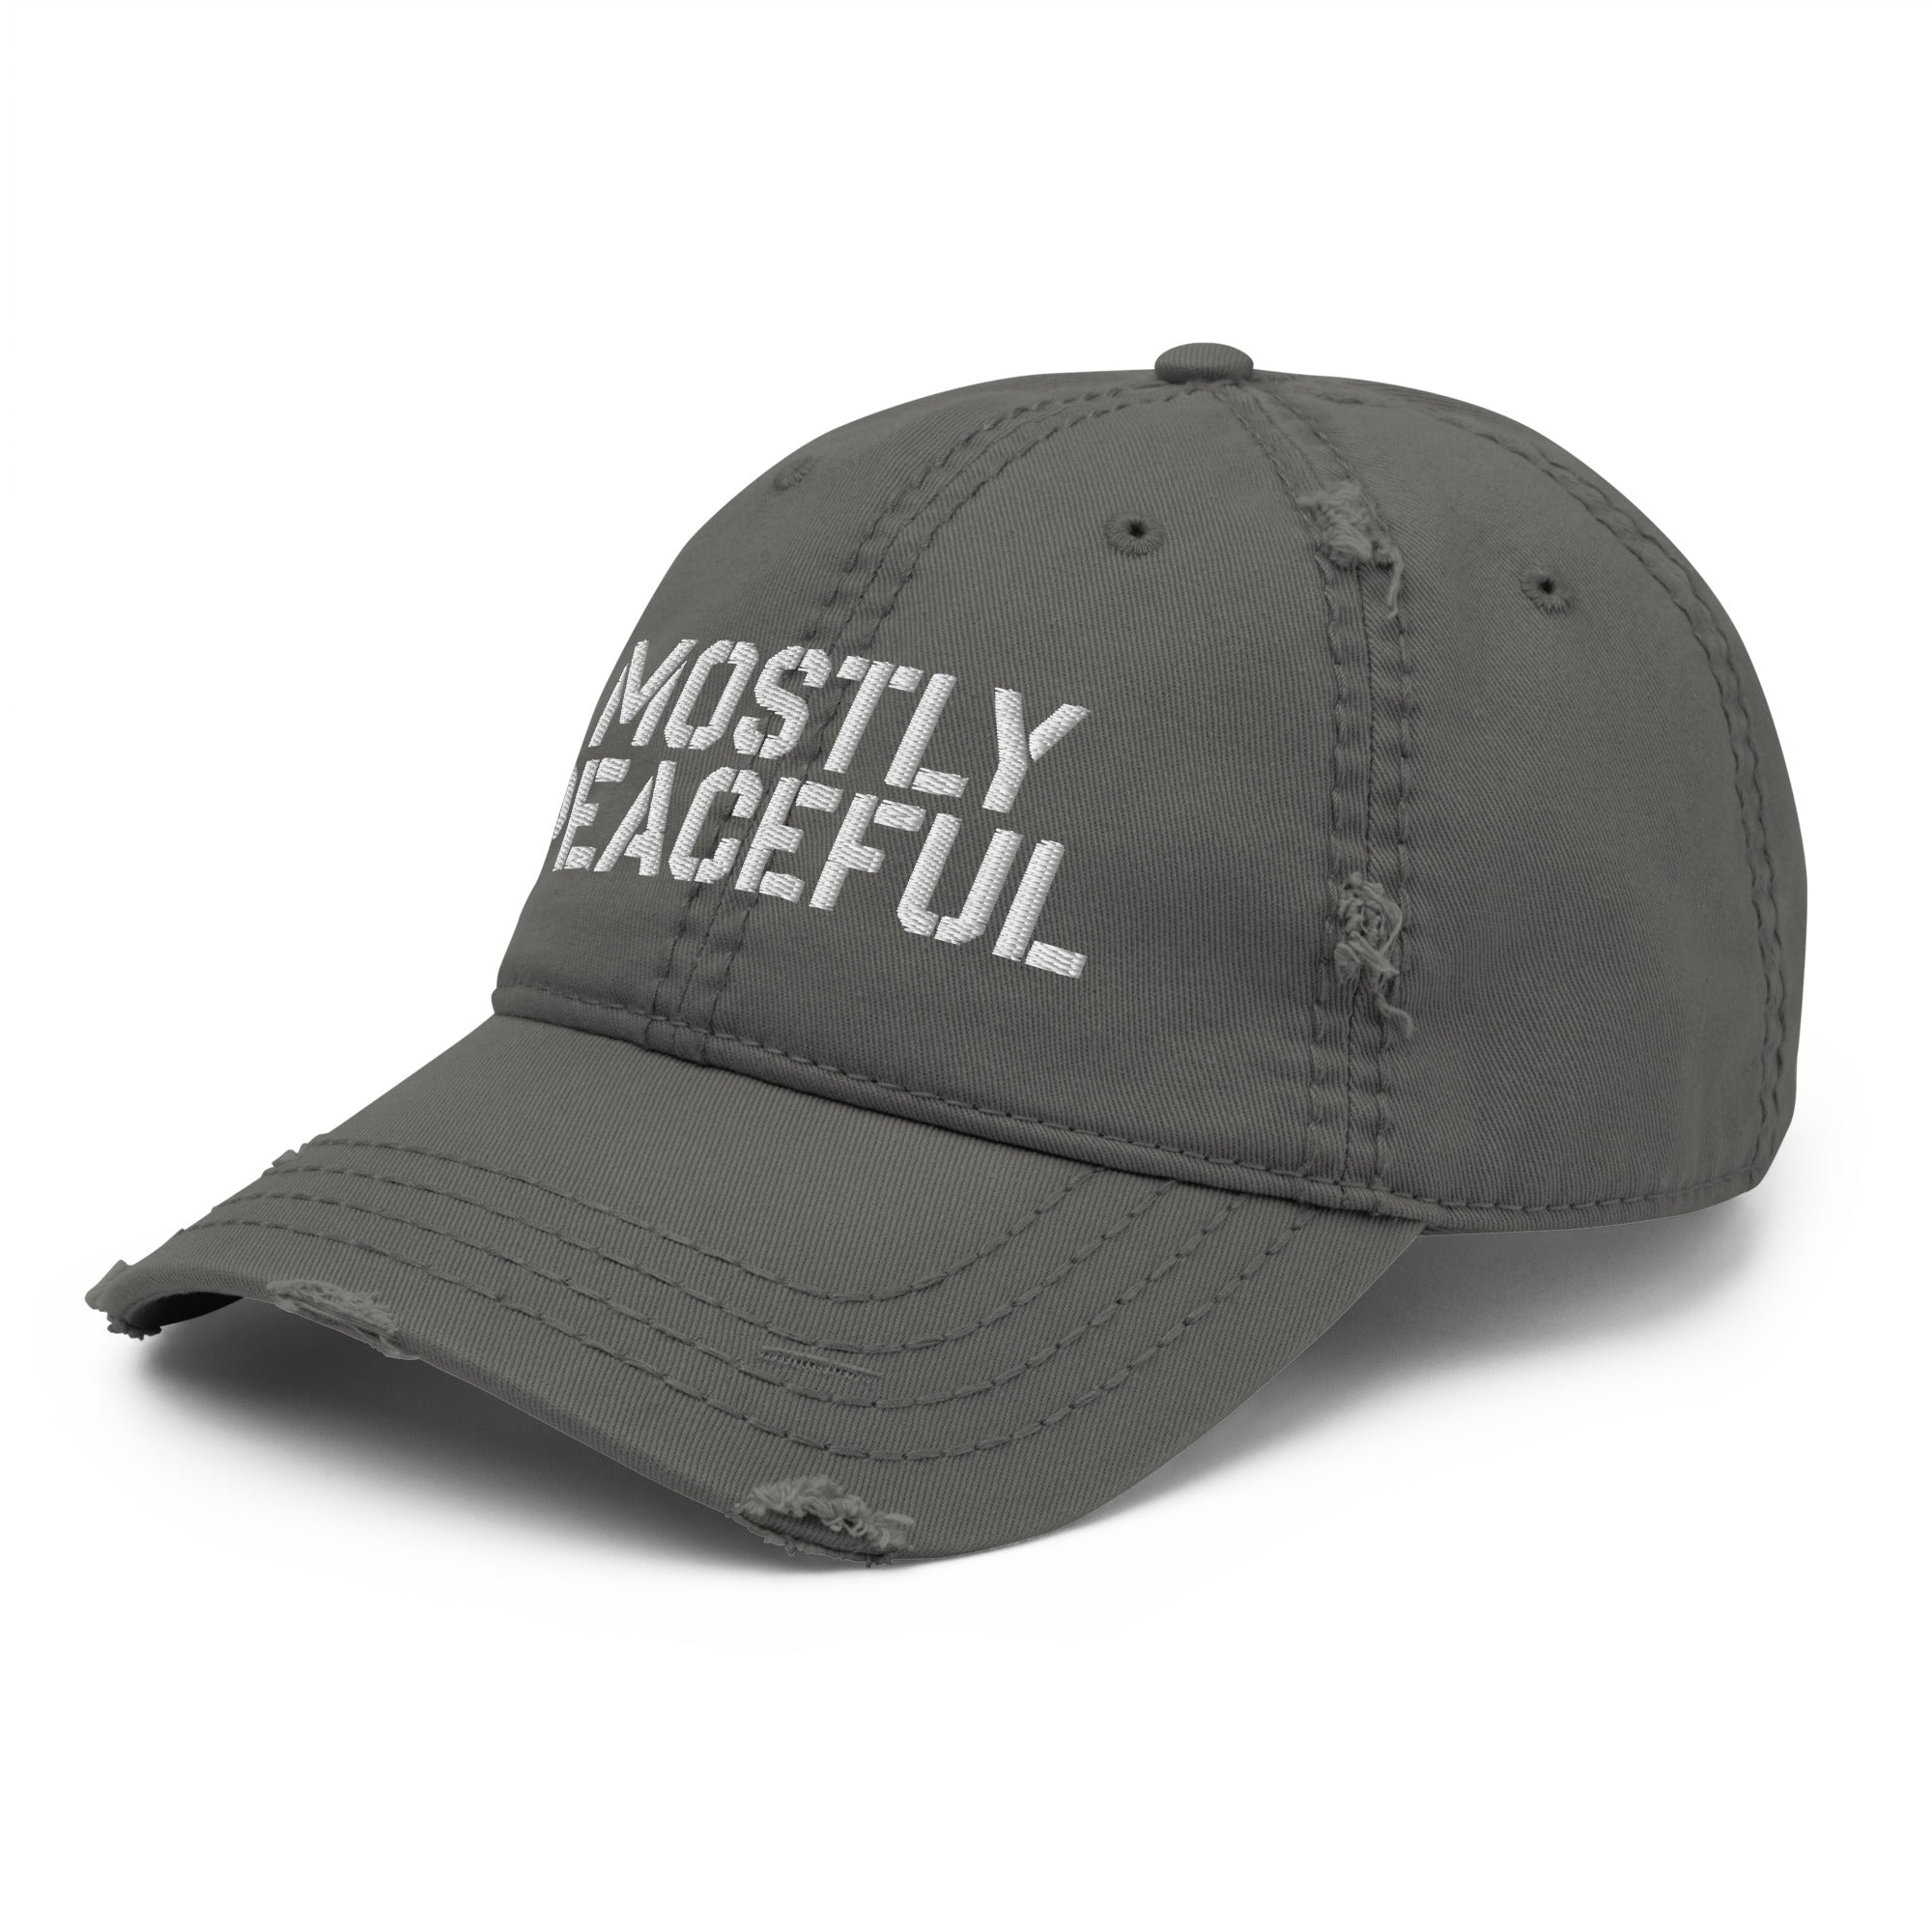 Mostly Peaceful Distressed Hat